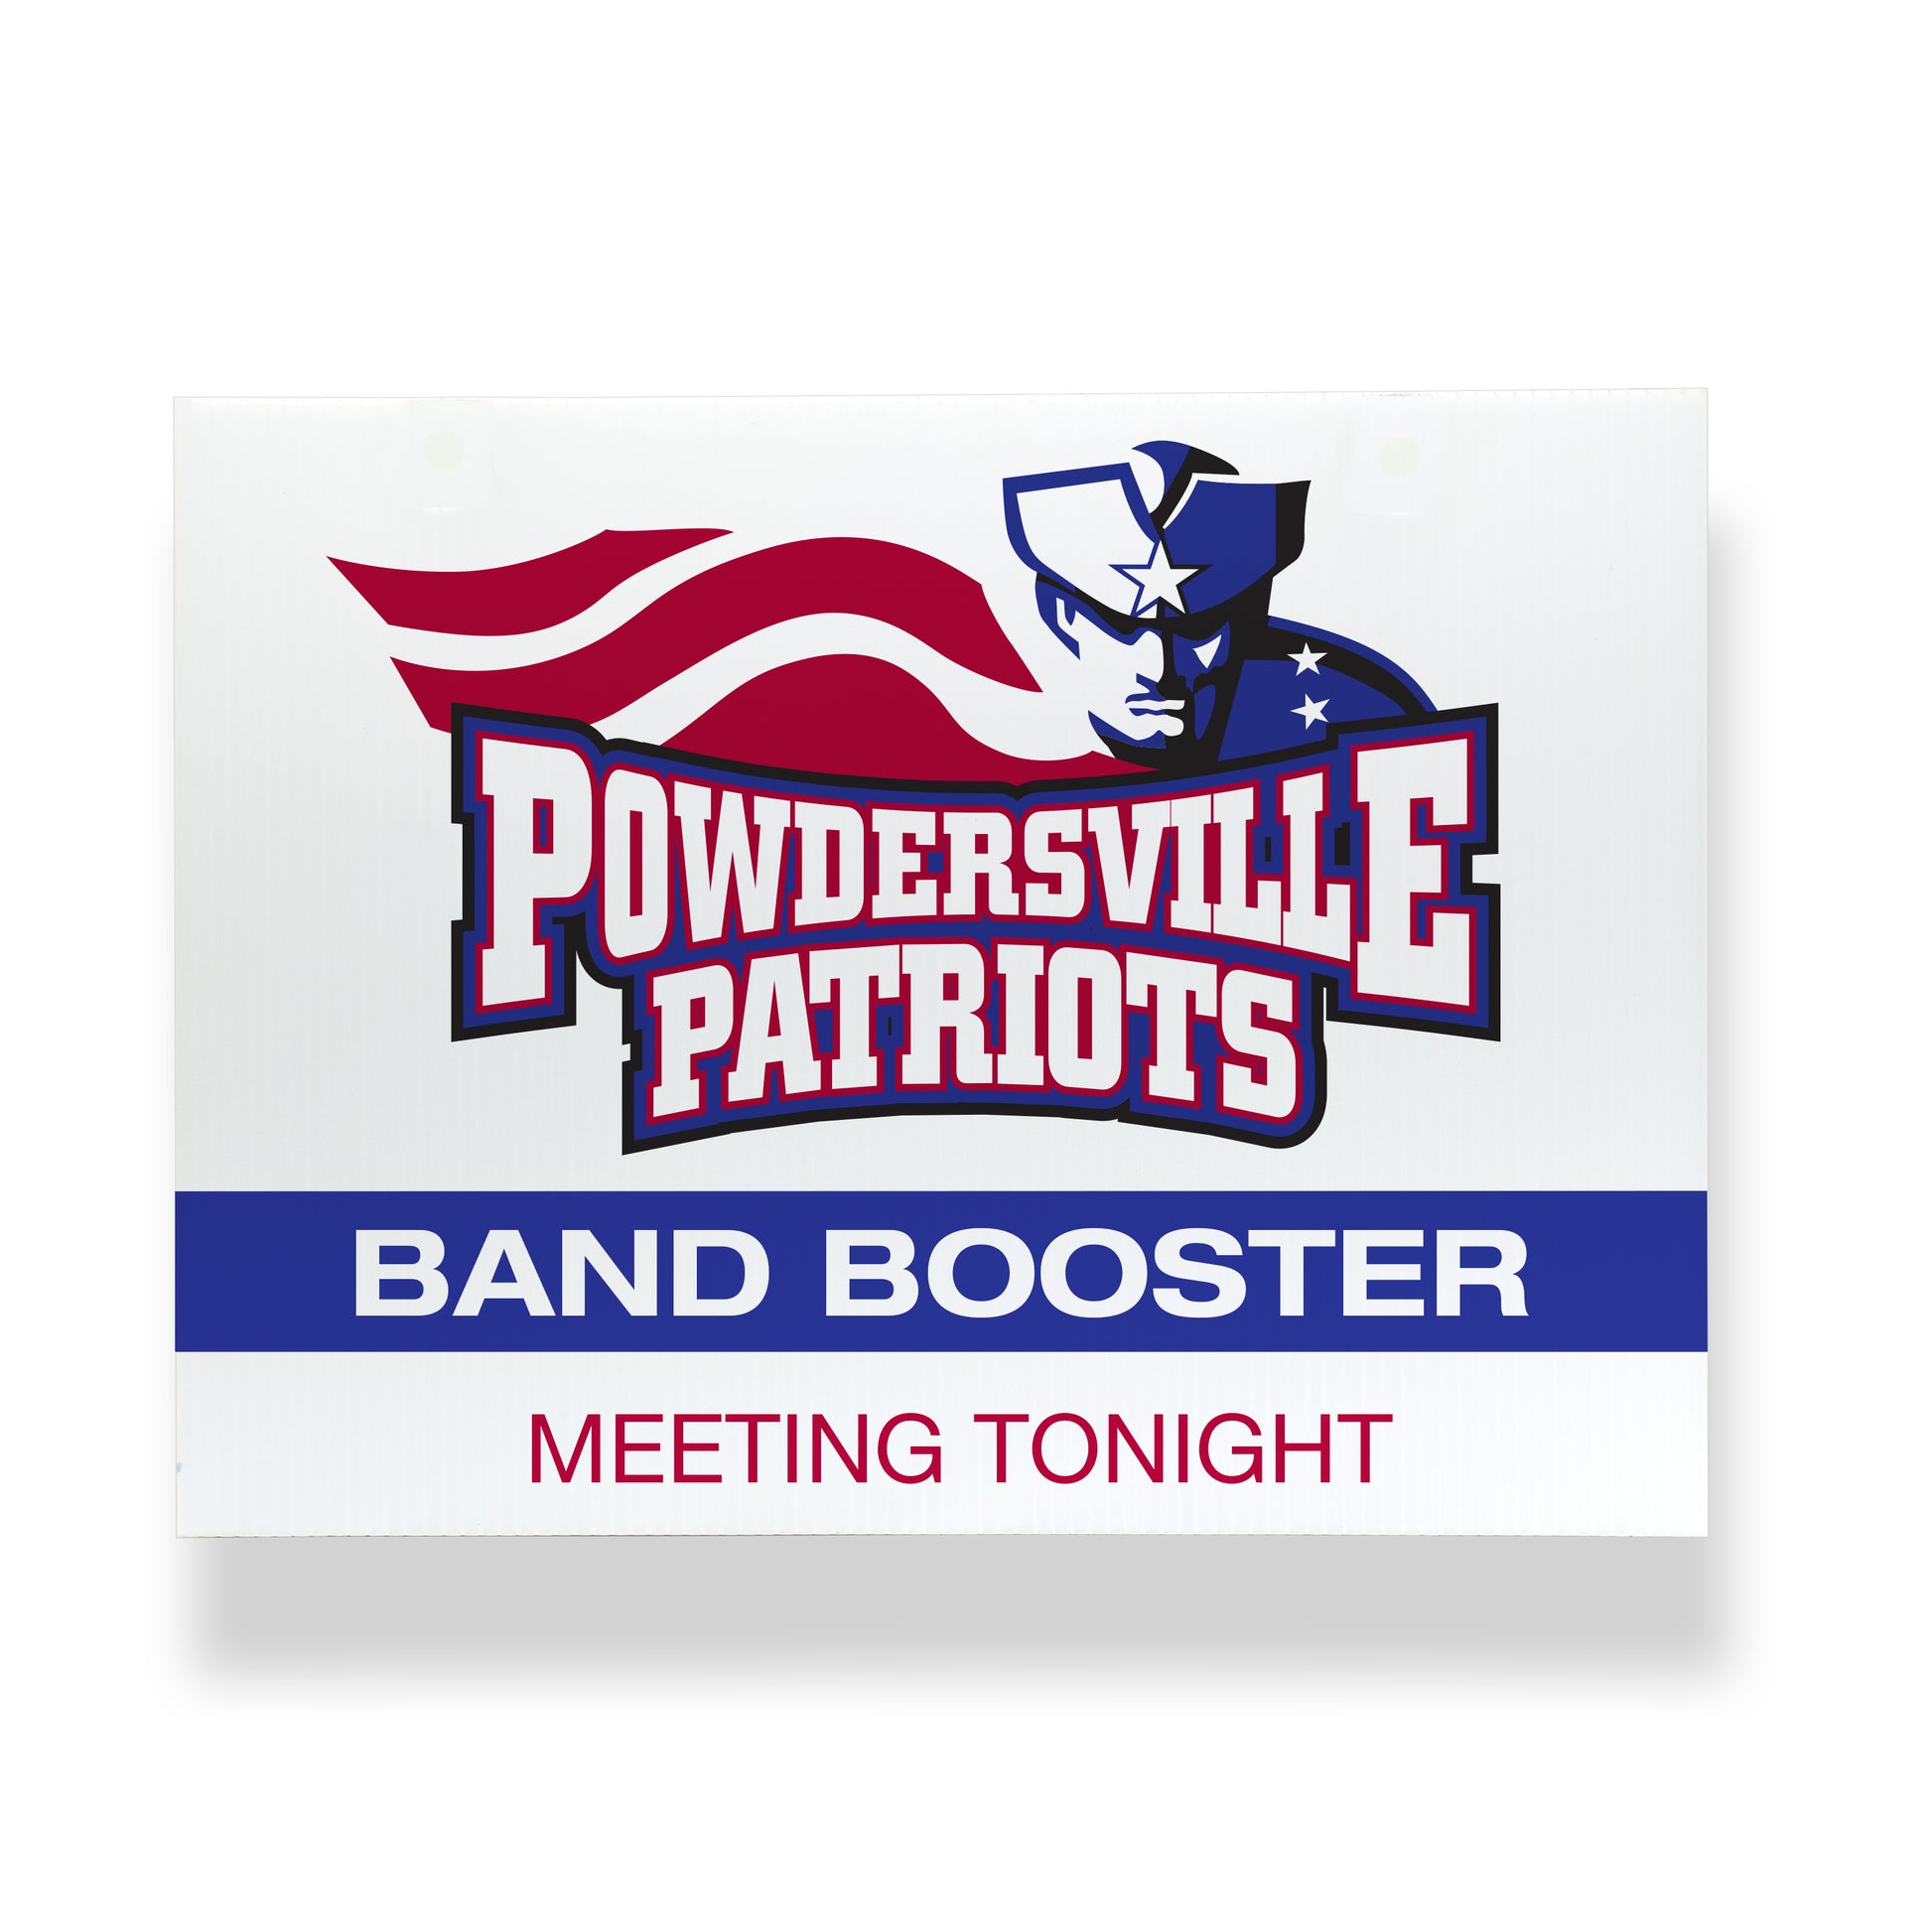 Custom coroplast sign with message for a high school band booster meeting